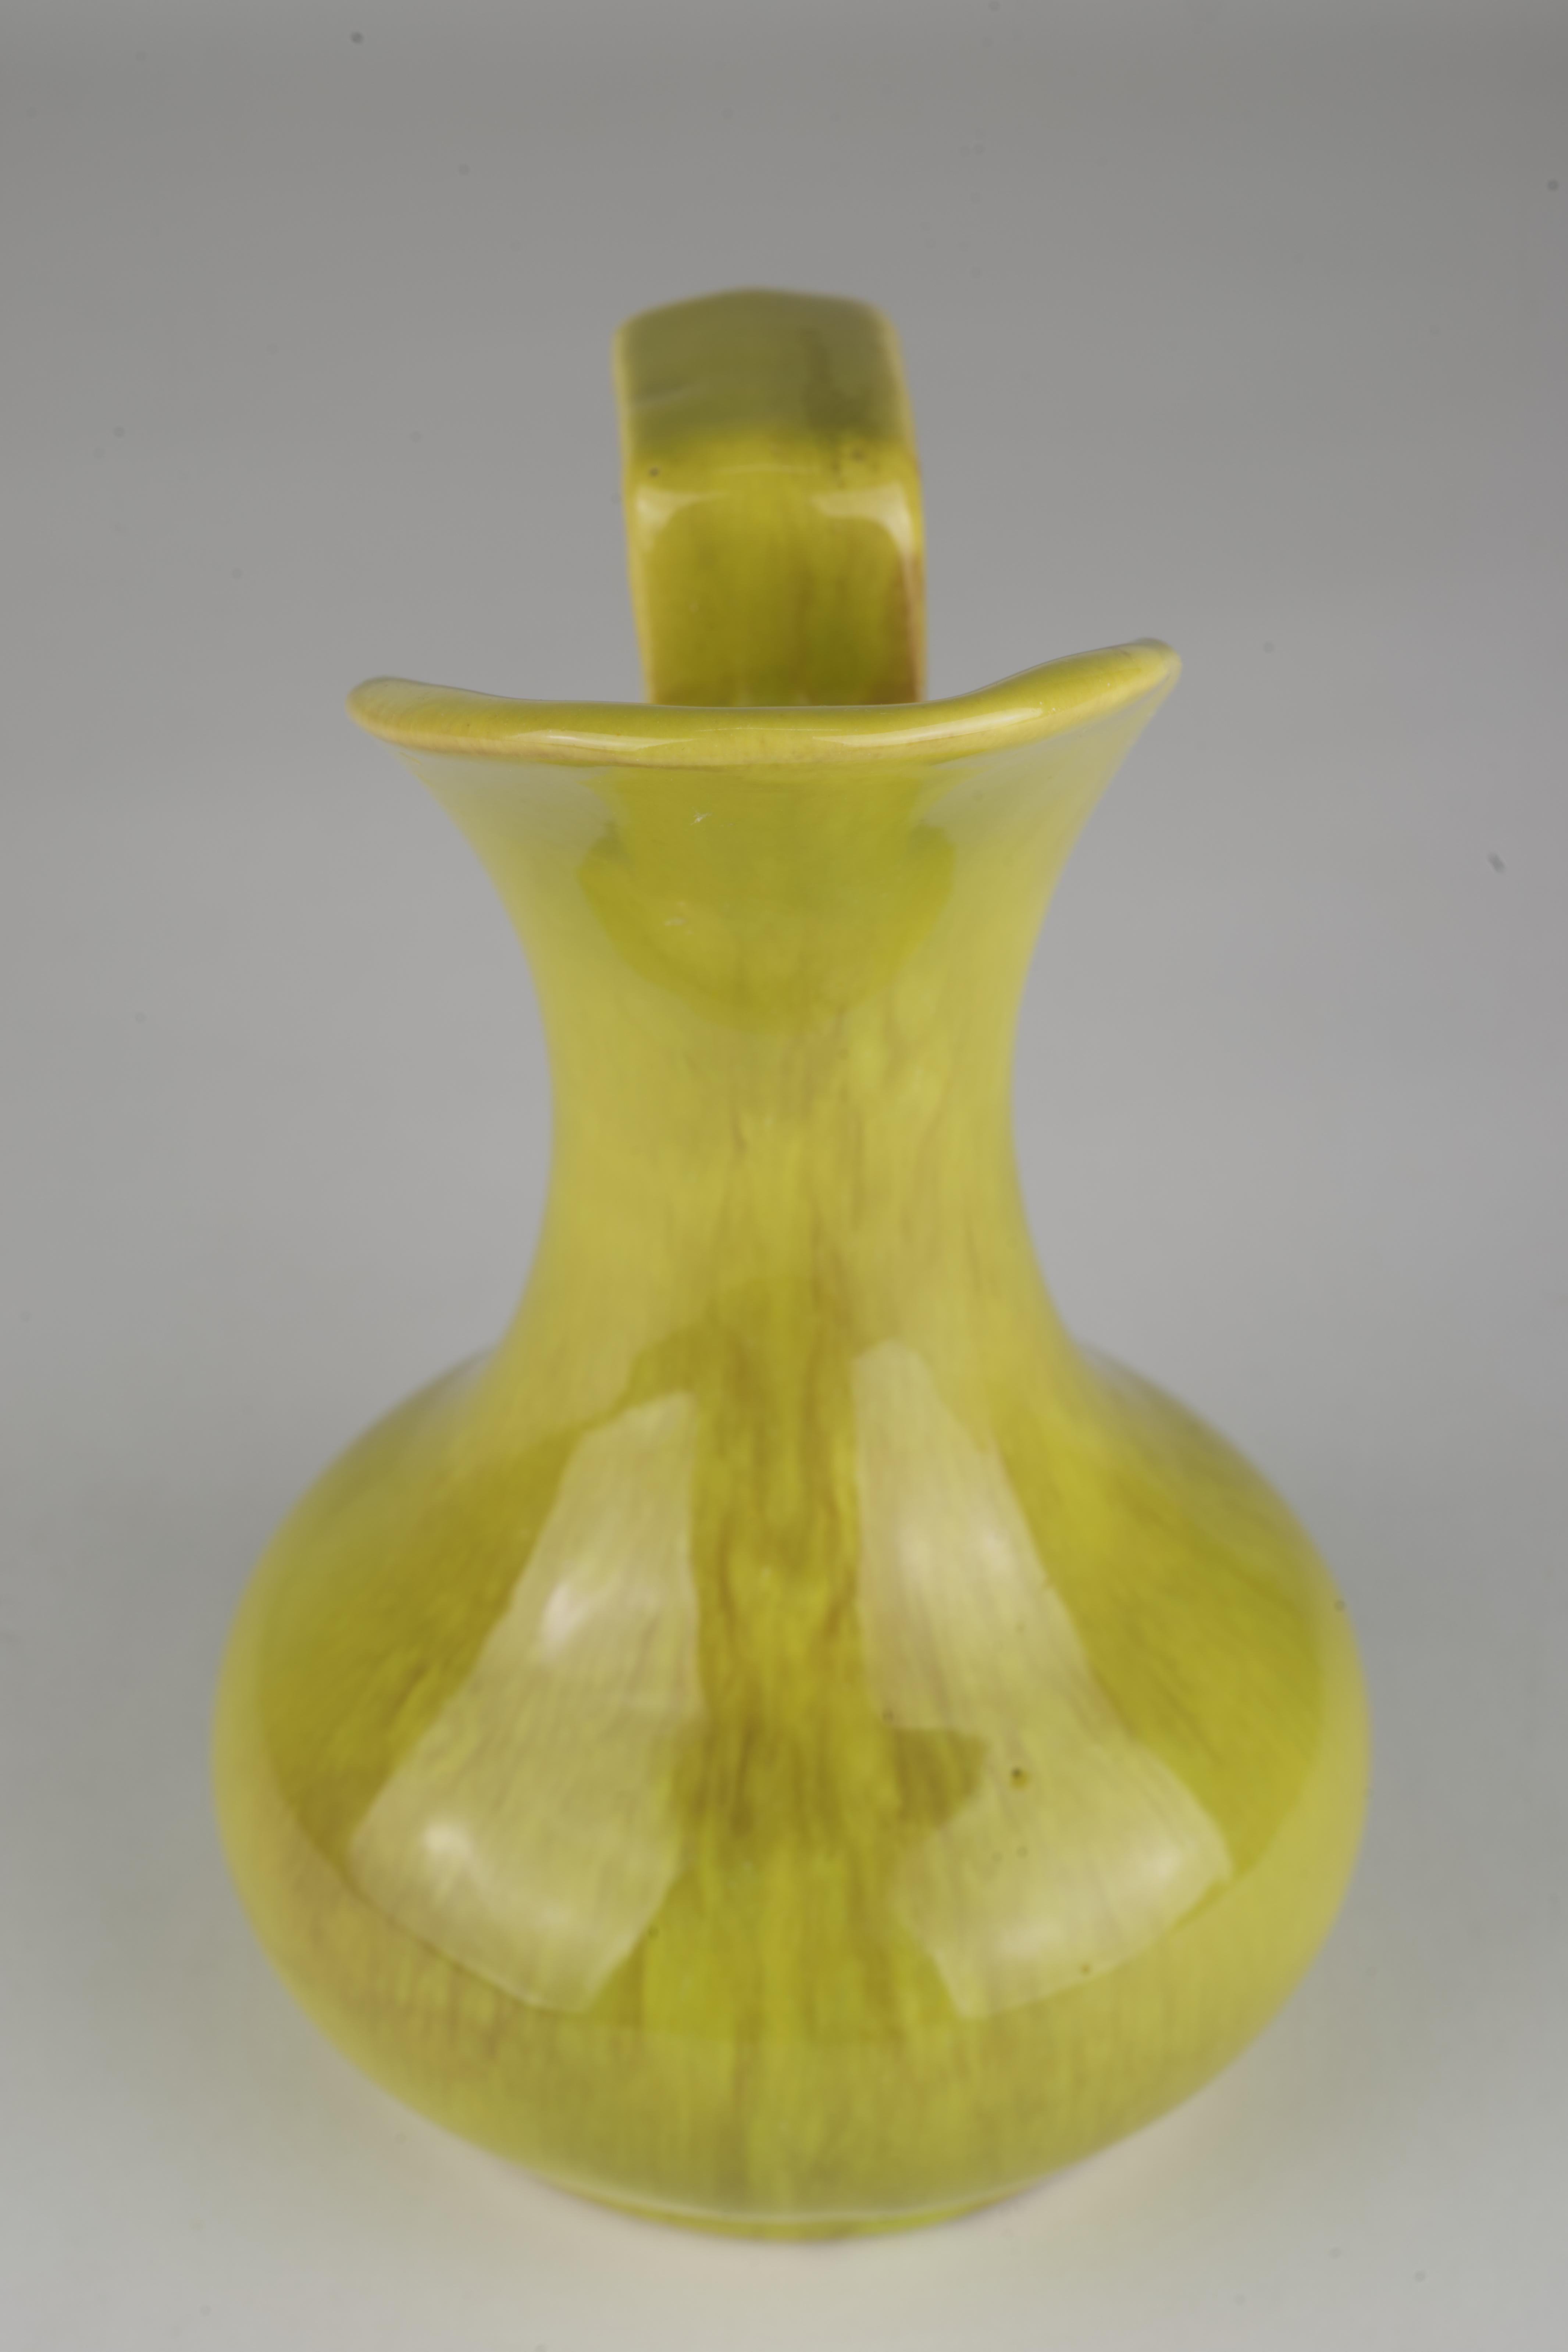 Gonder Pottery Bud Vase Ewer in Chartreuse Drip Glaze 1940s-1950s For Sale 4